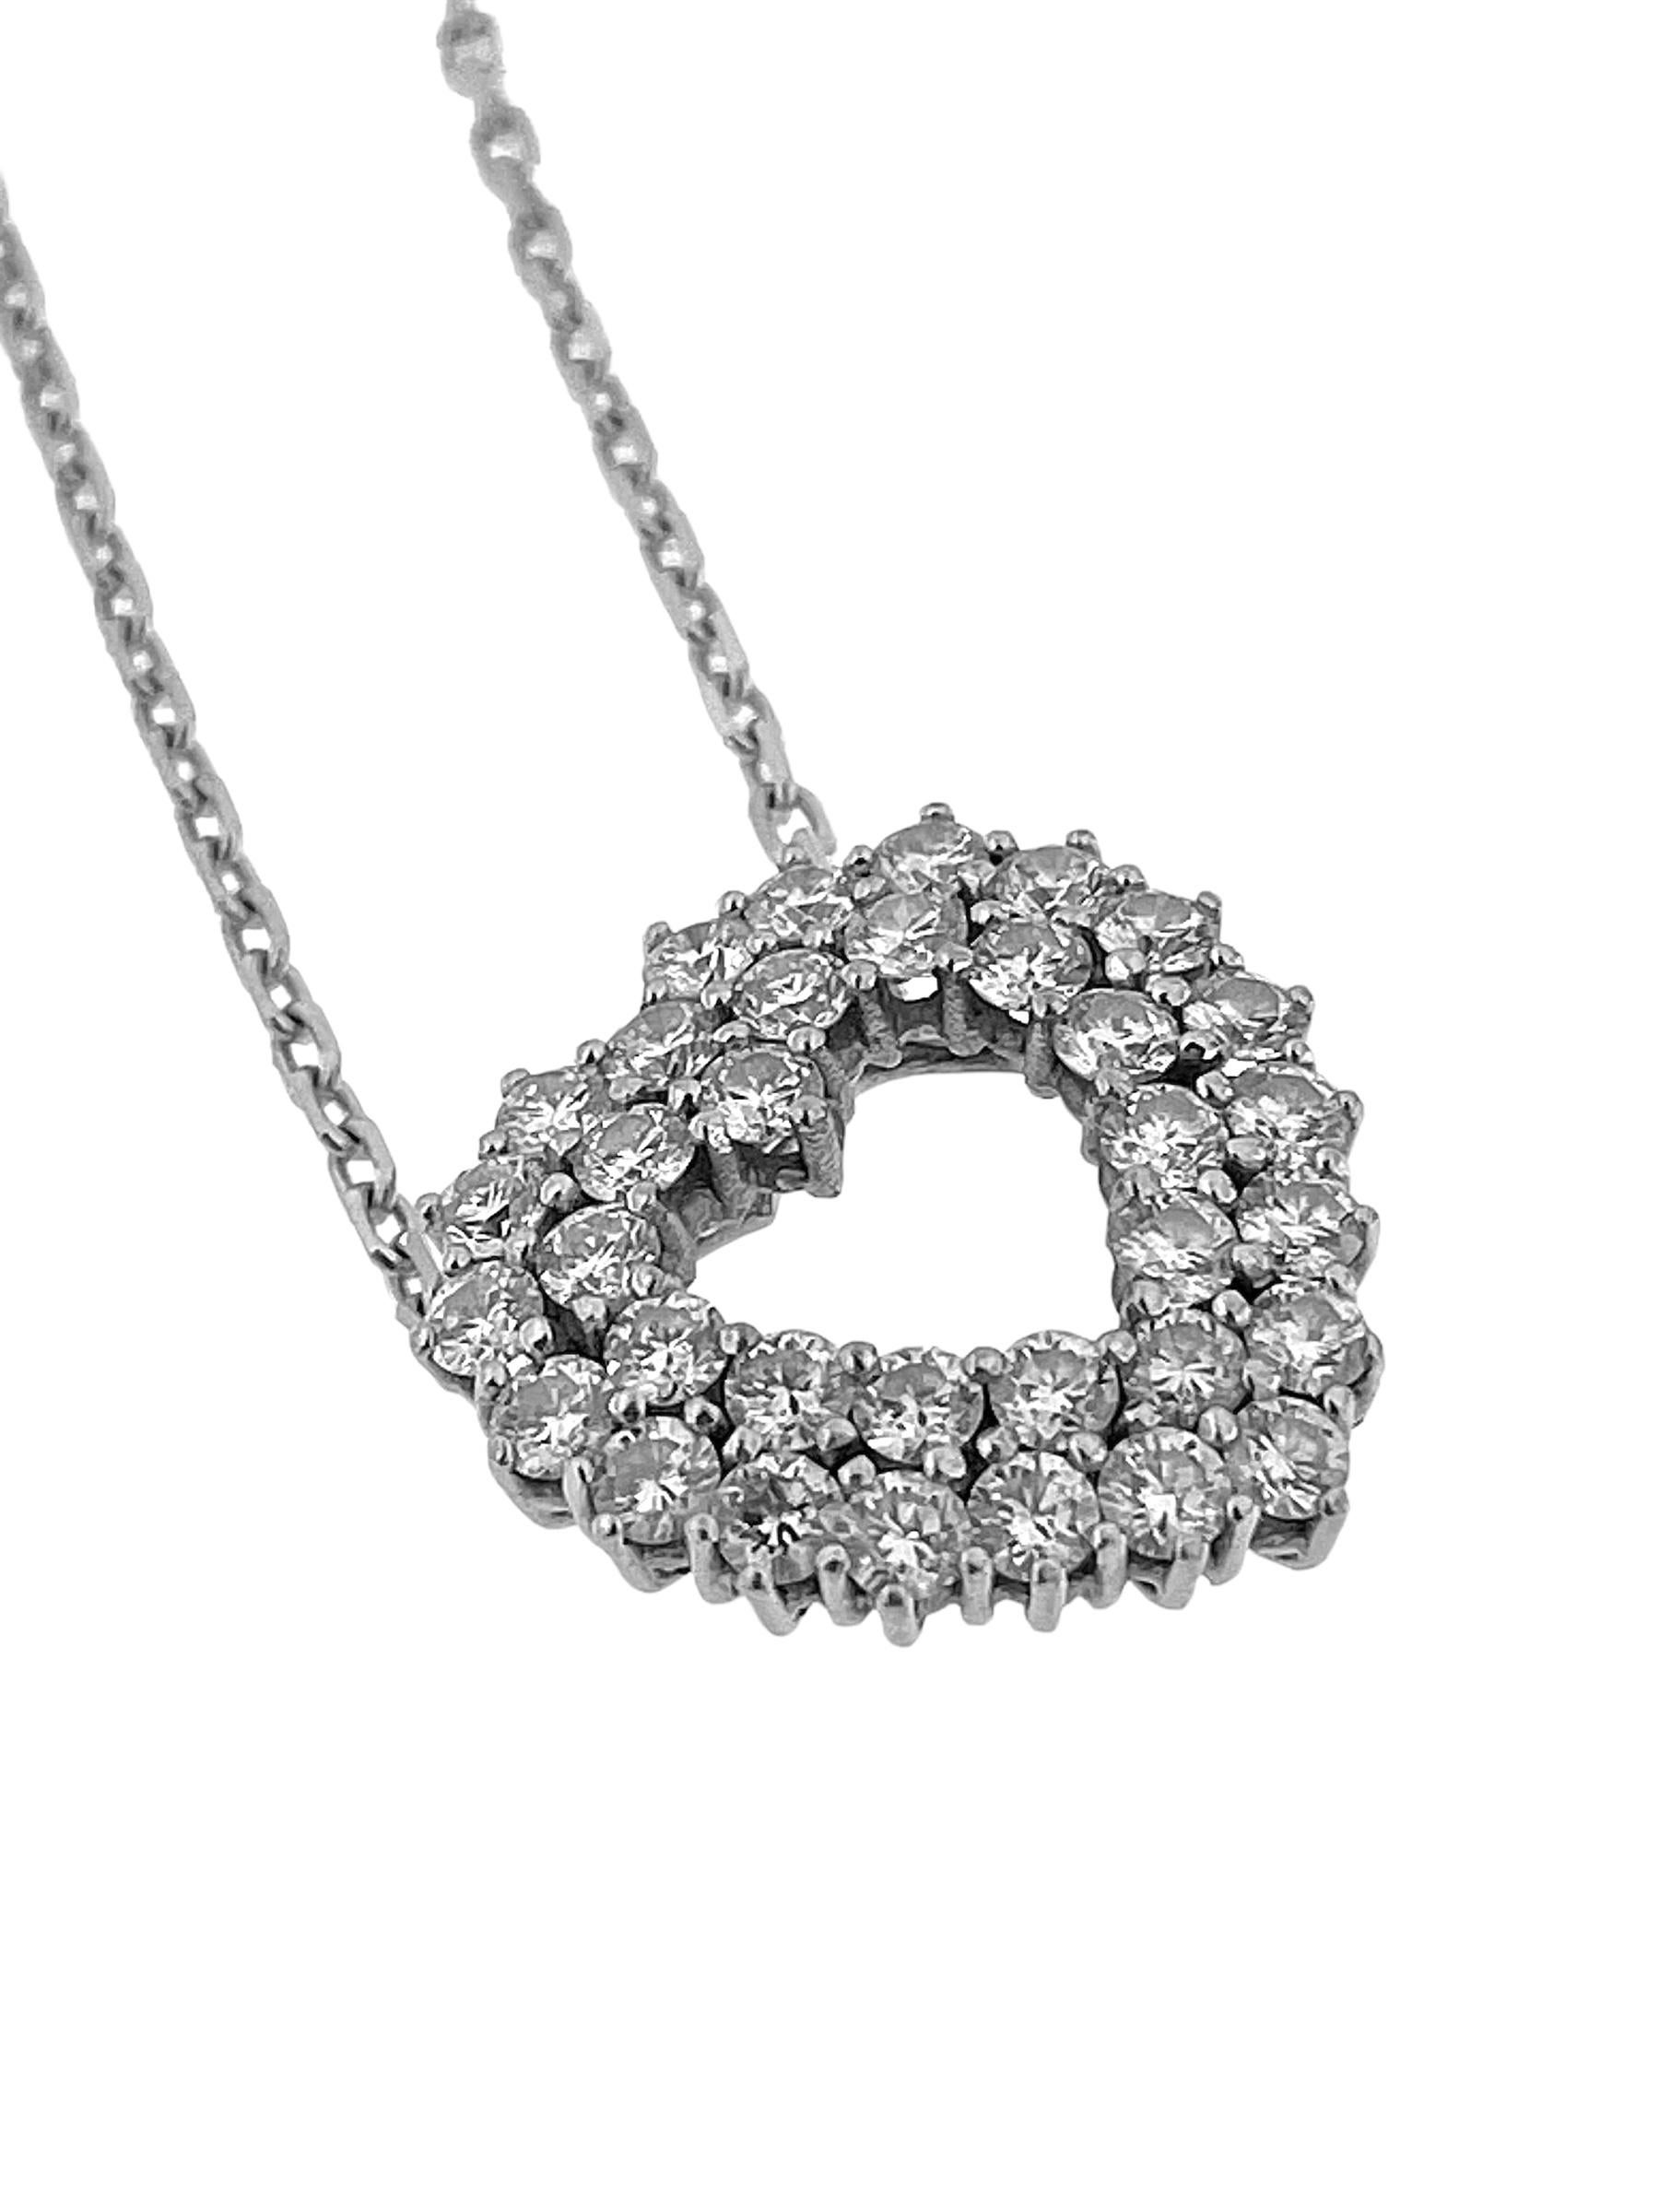 The Italian Diamonds Heart Necklace in 18 karat White Gold is a breathtaking expression of love and sophistication. Crafted with exquisite attention to detail, this necklace features a heart-shaped pendant adorned with dazzling diamonds, set in